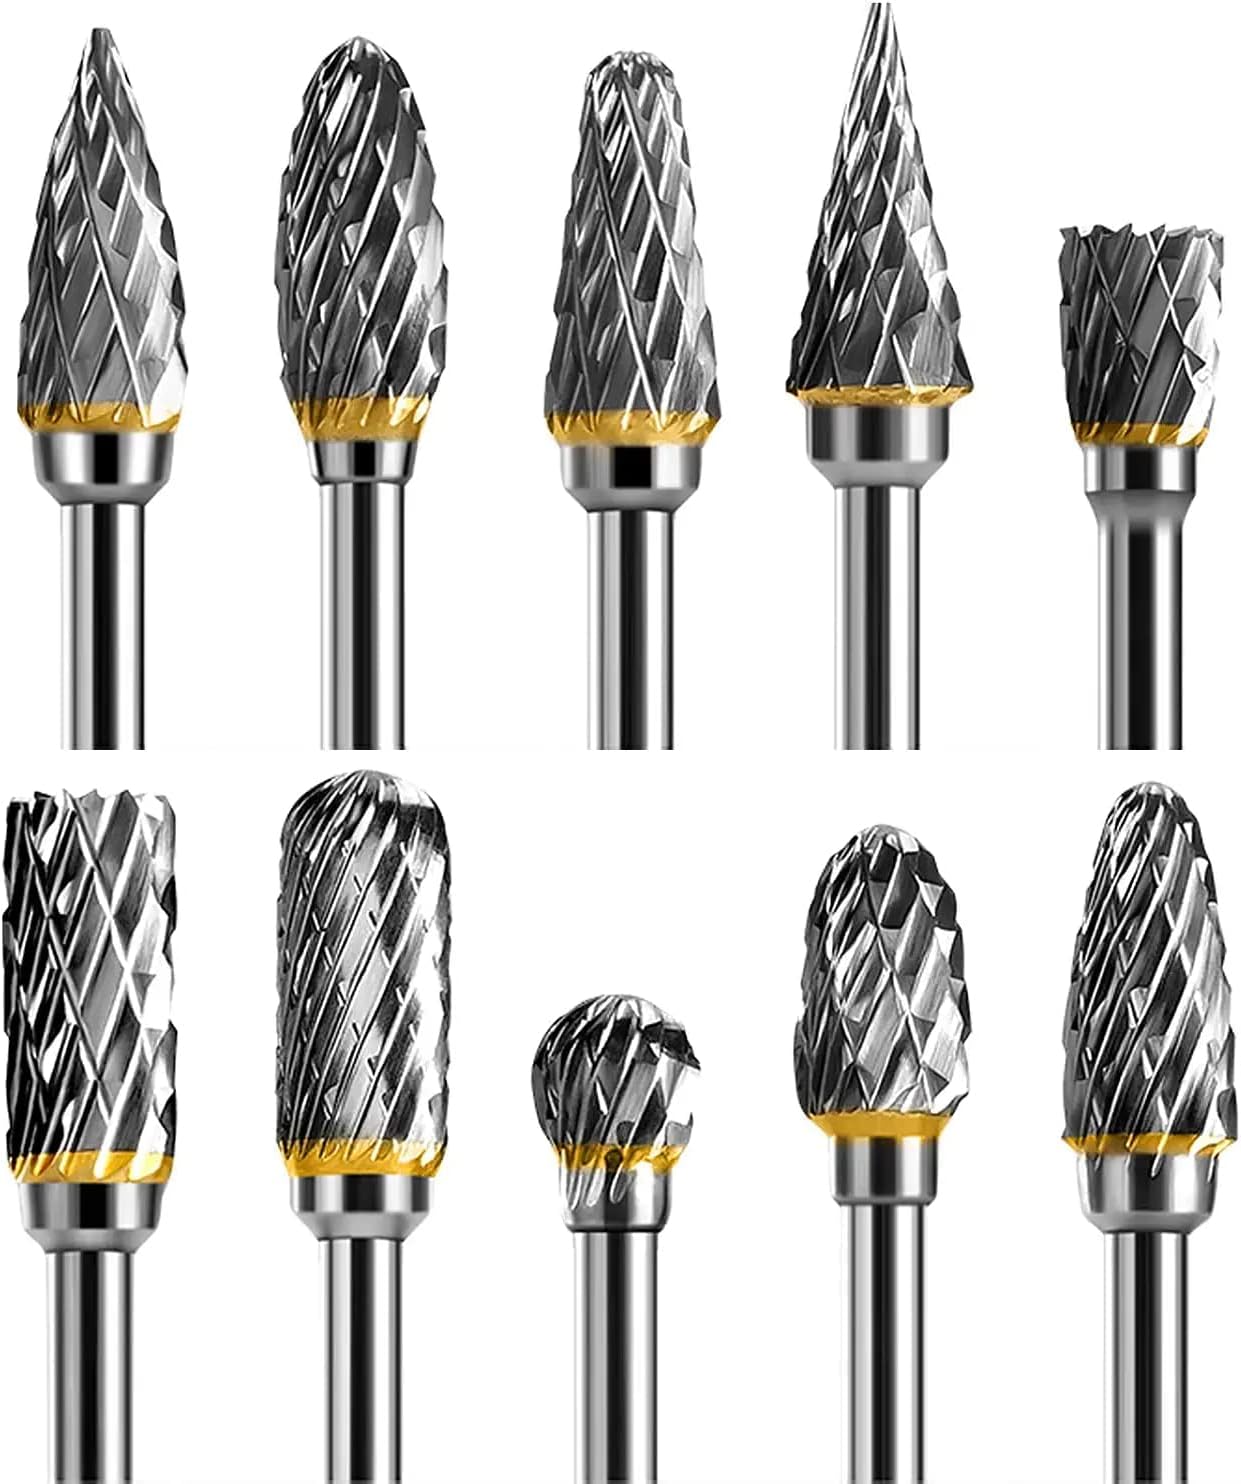 UMUVKIU Carbide Burr Set Compatible with Dremel 1/8 Shank 10PC Die Grinder Rotary Tool Fits Dremel Rotary Tool for Grinder Drill, DIY Wood-Working Carving, Metal Polishing, Engraving, Drilling